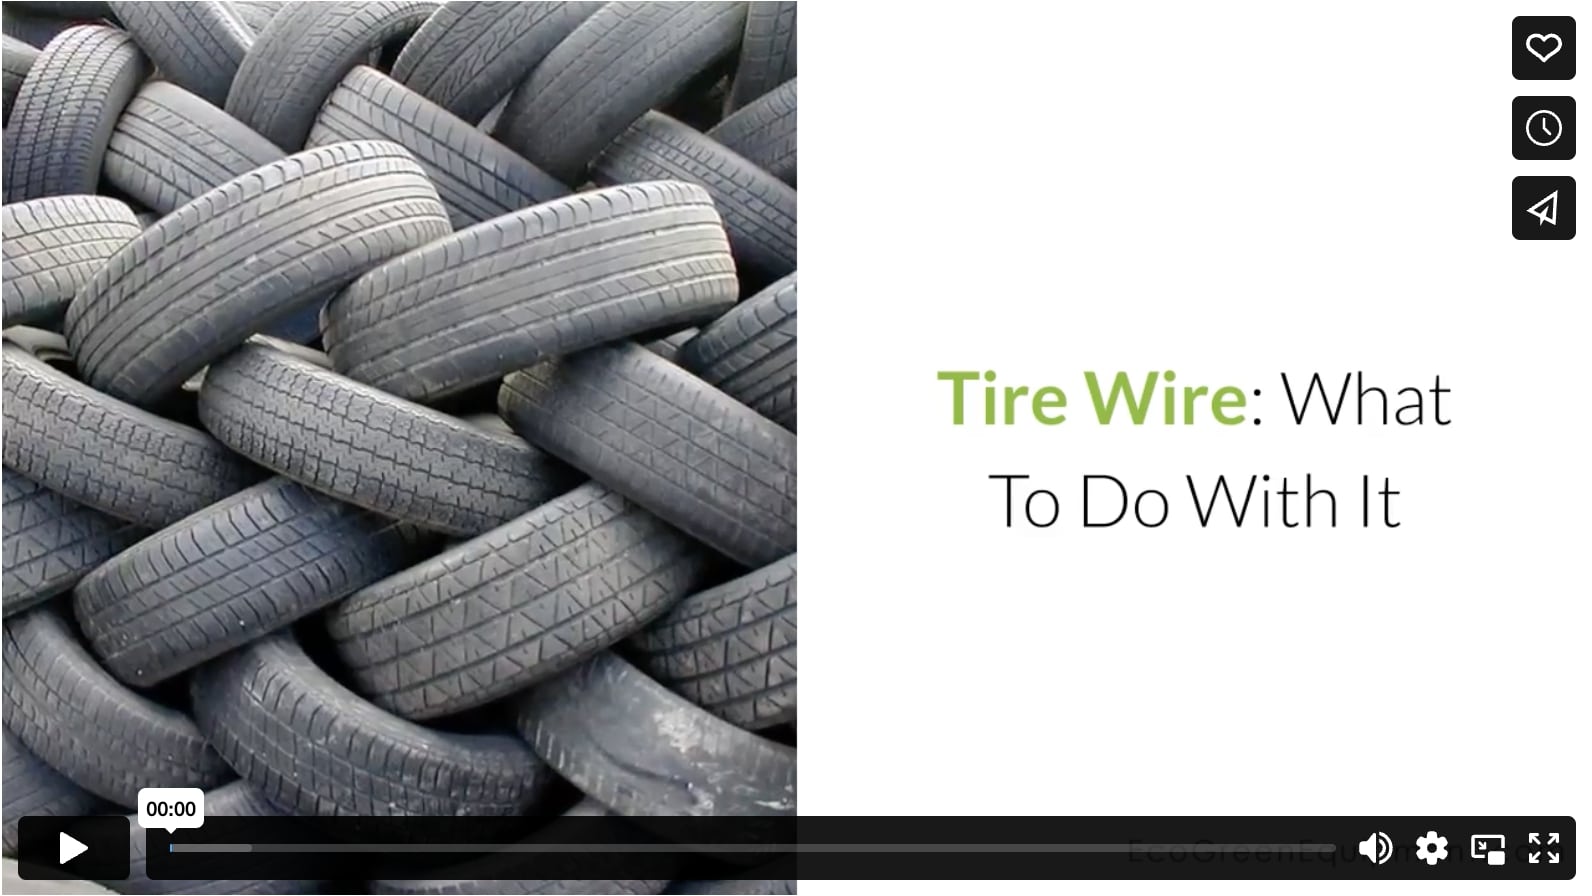 Tire Wire: What To Do With It